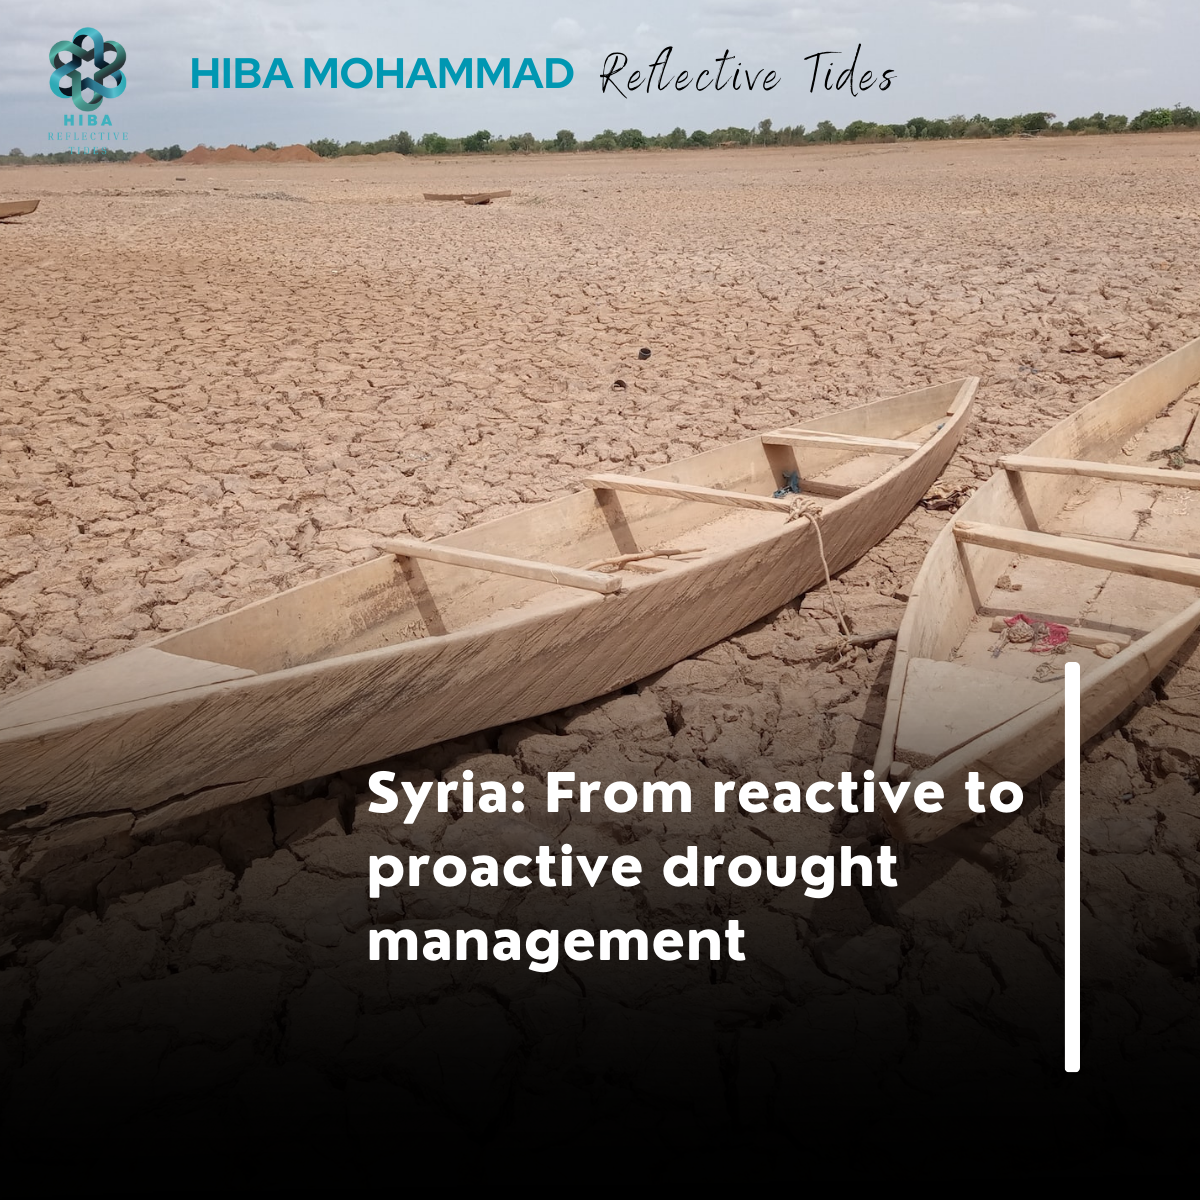 Syria: From reactive to proactive drought management